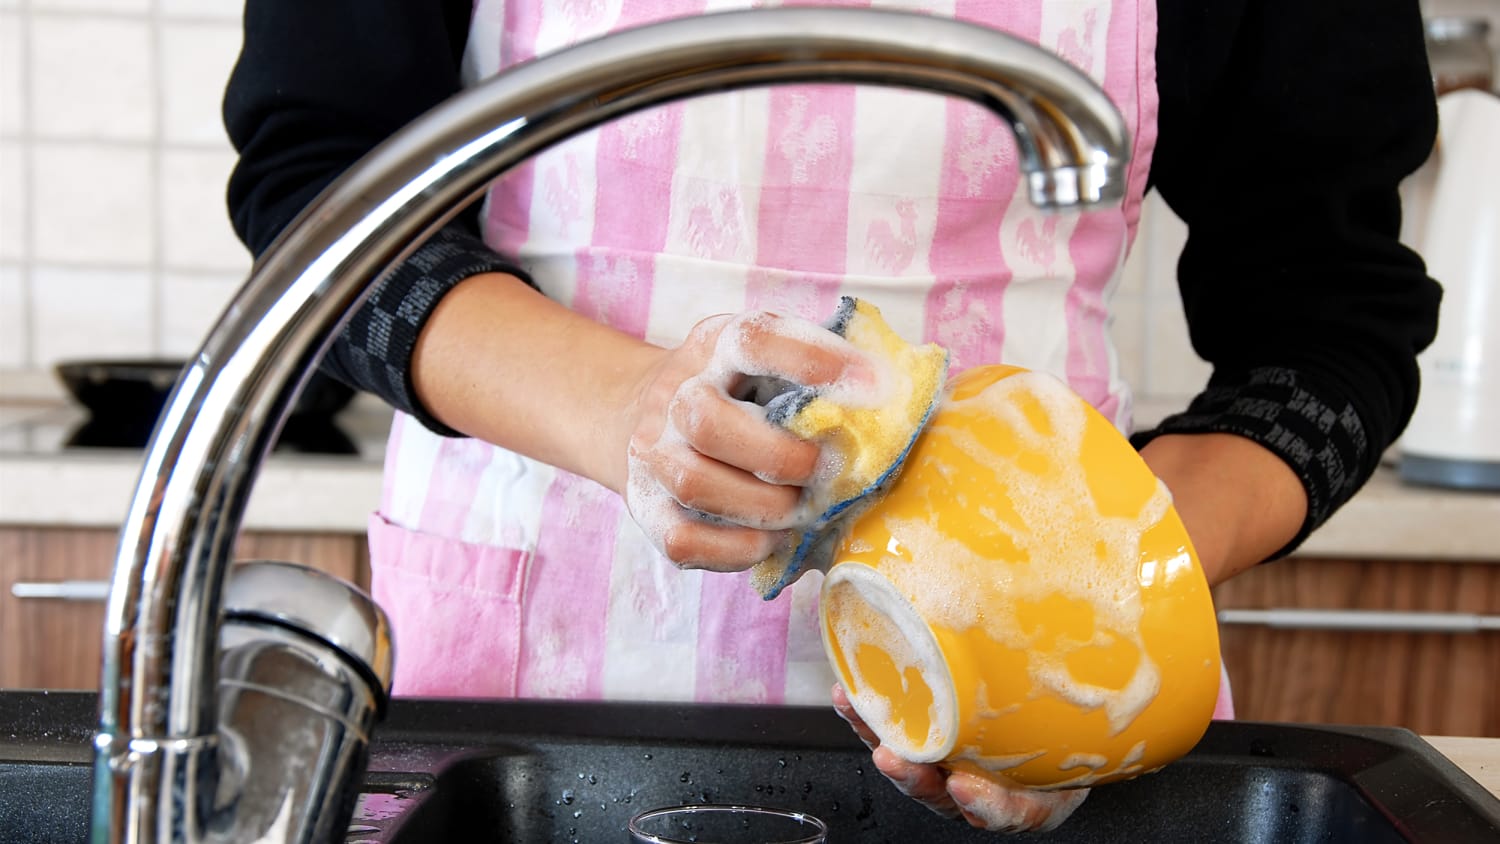 Washing dishes could cleanse mind: Study finds meditation opportunity at  the sink